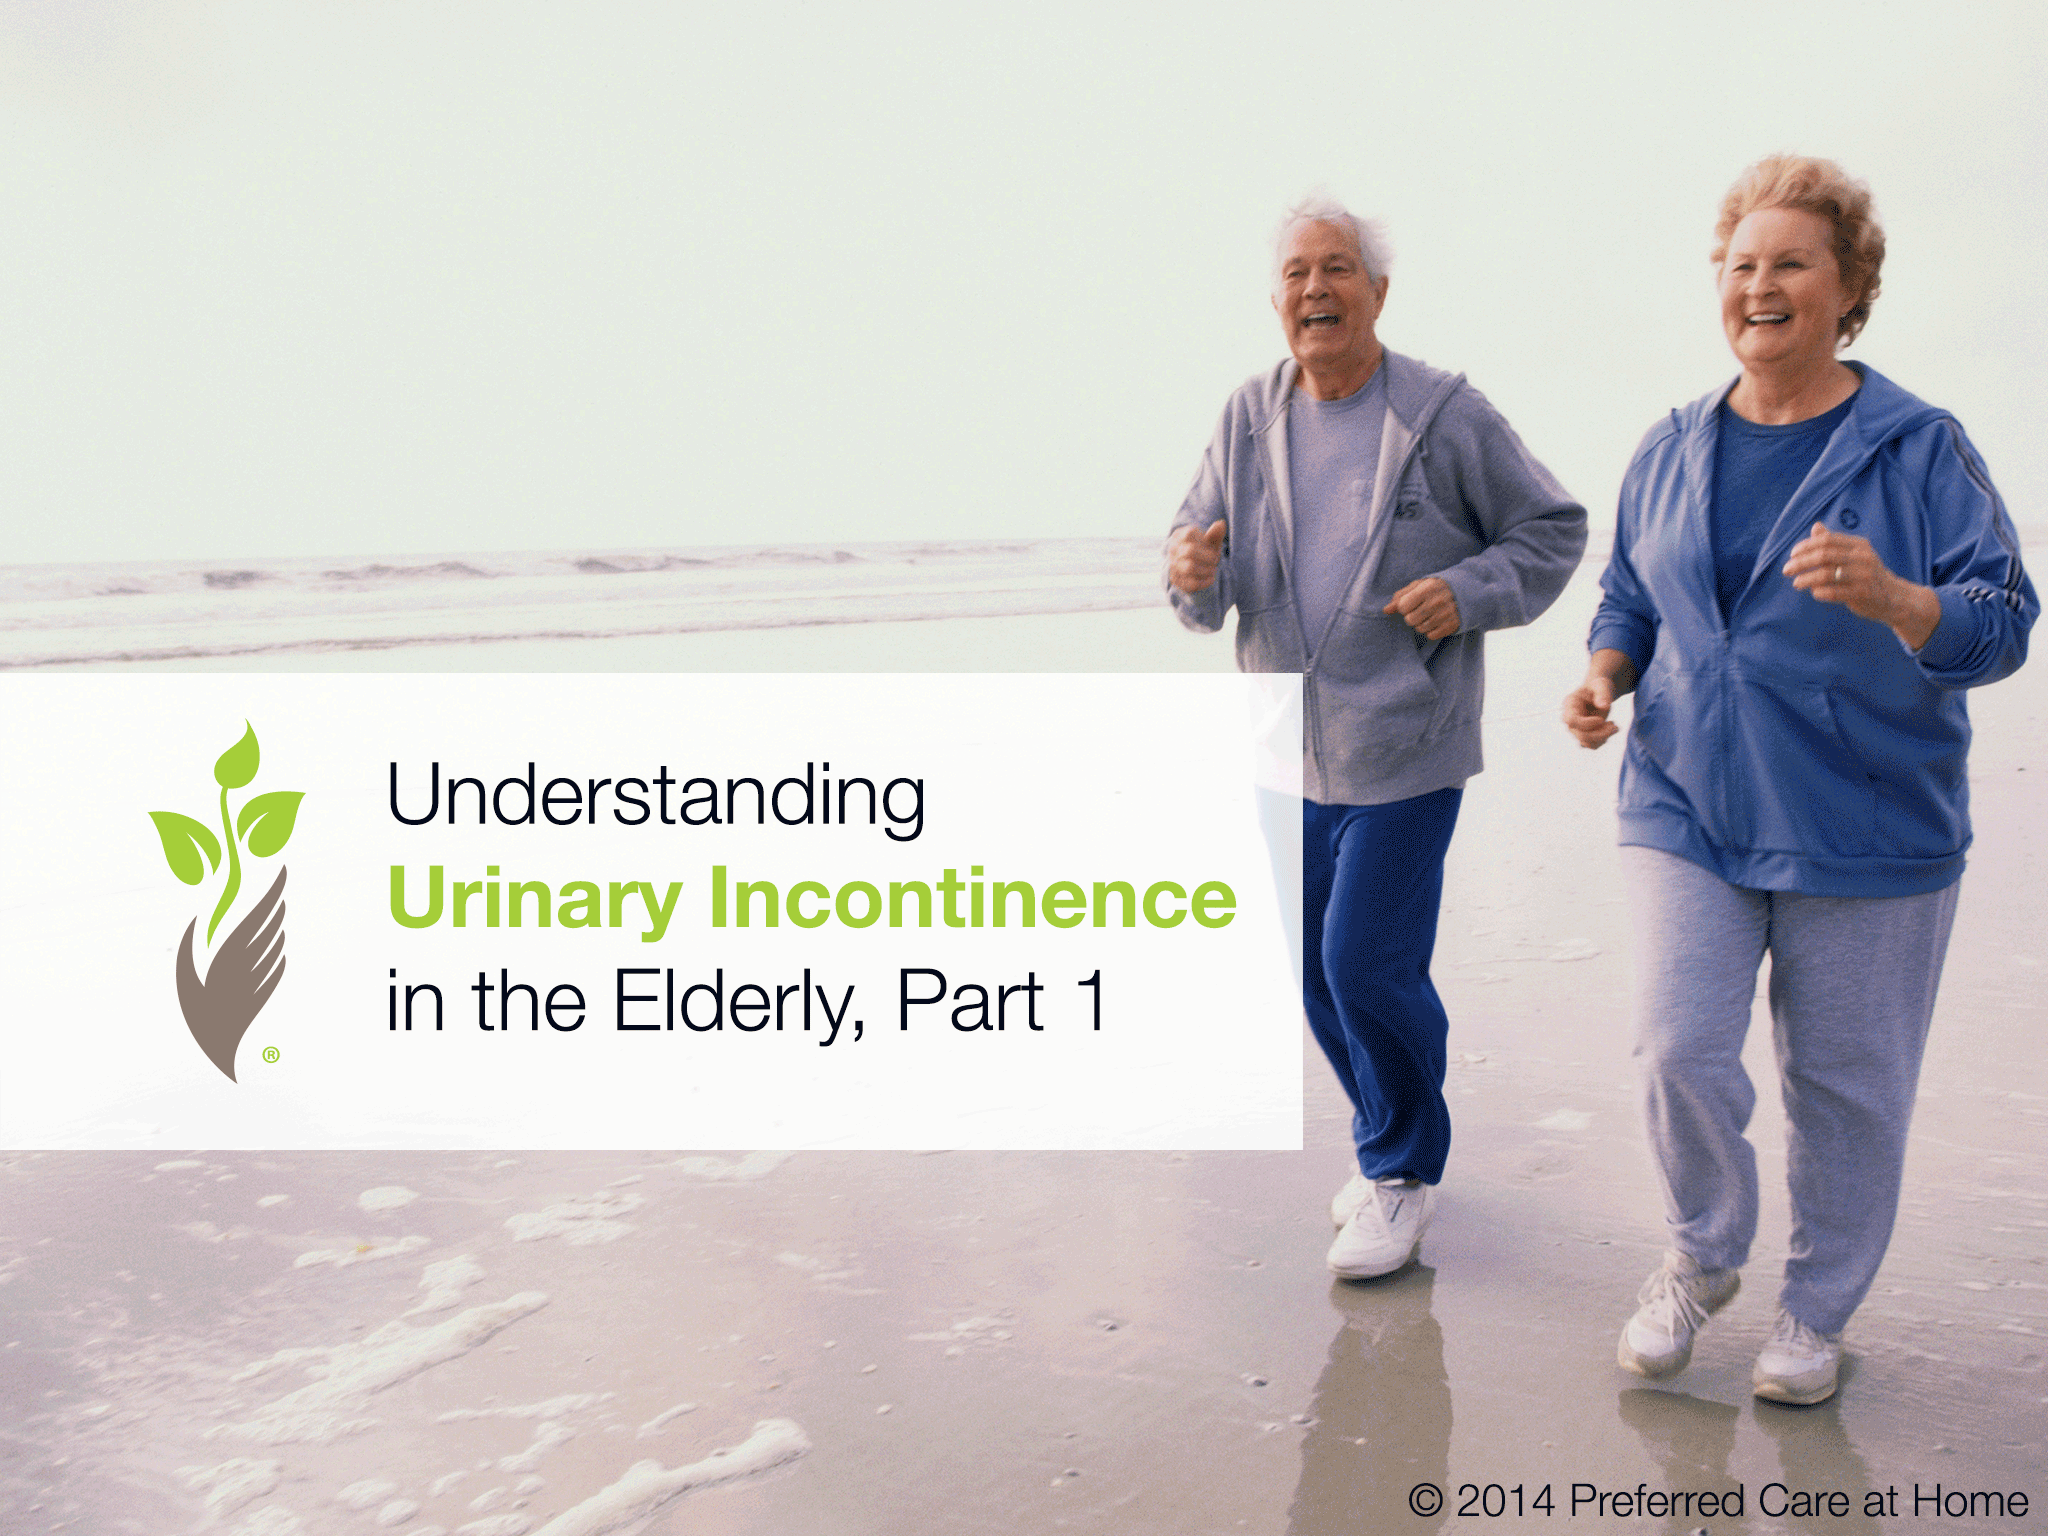 Understanding Urinary Incontinence in the Elderly